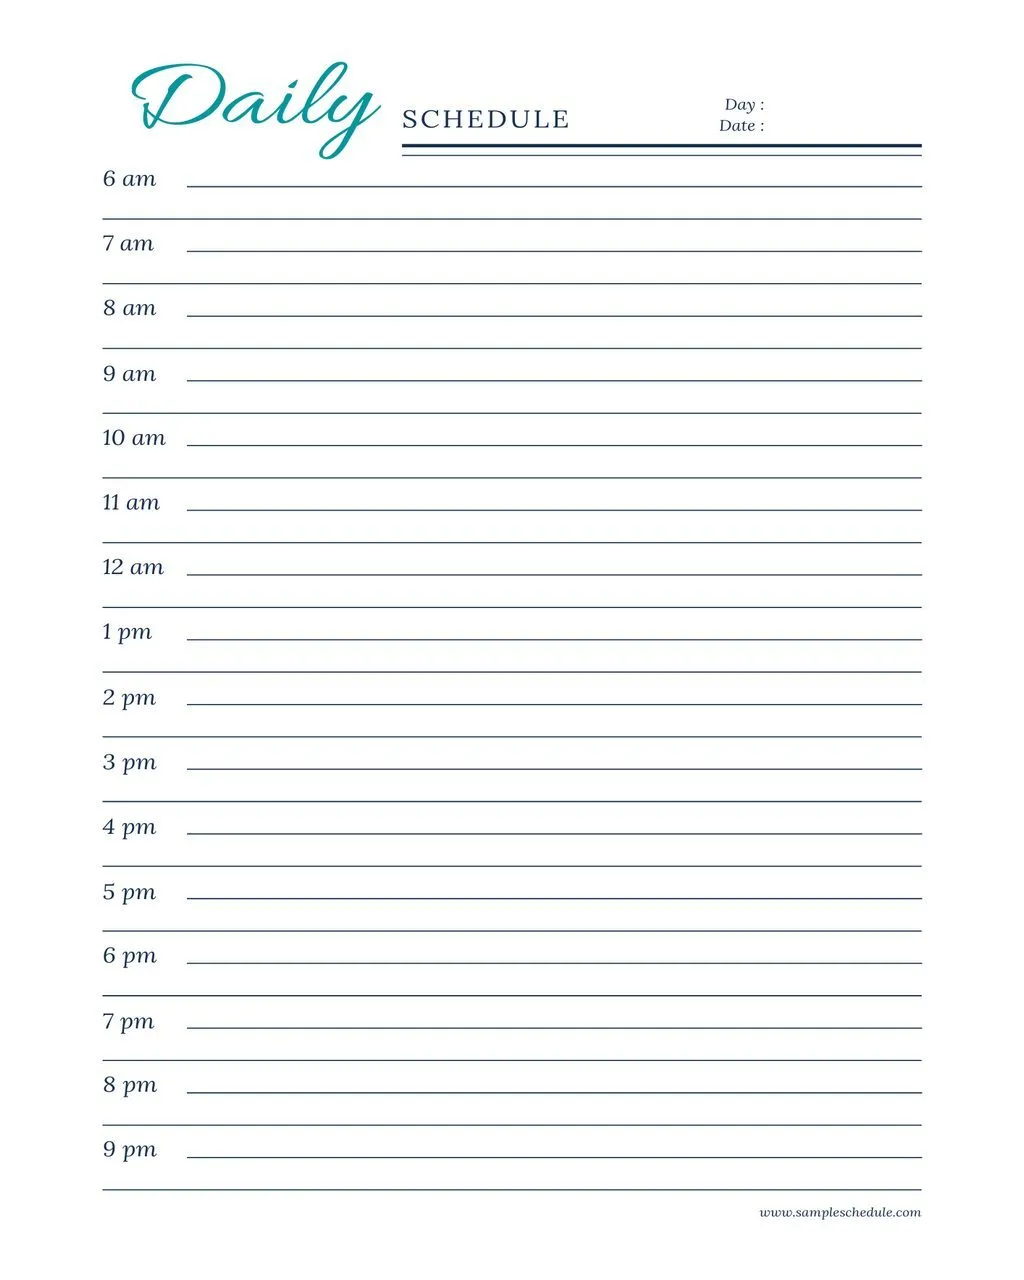 Printable Schedule Template Daily 08